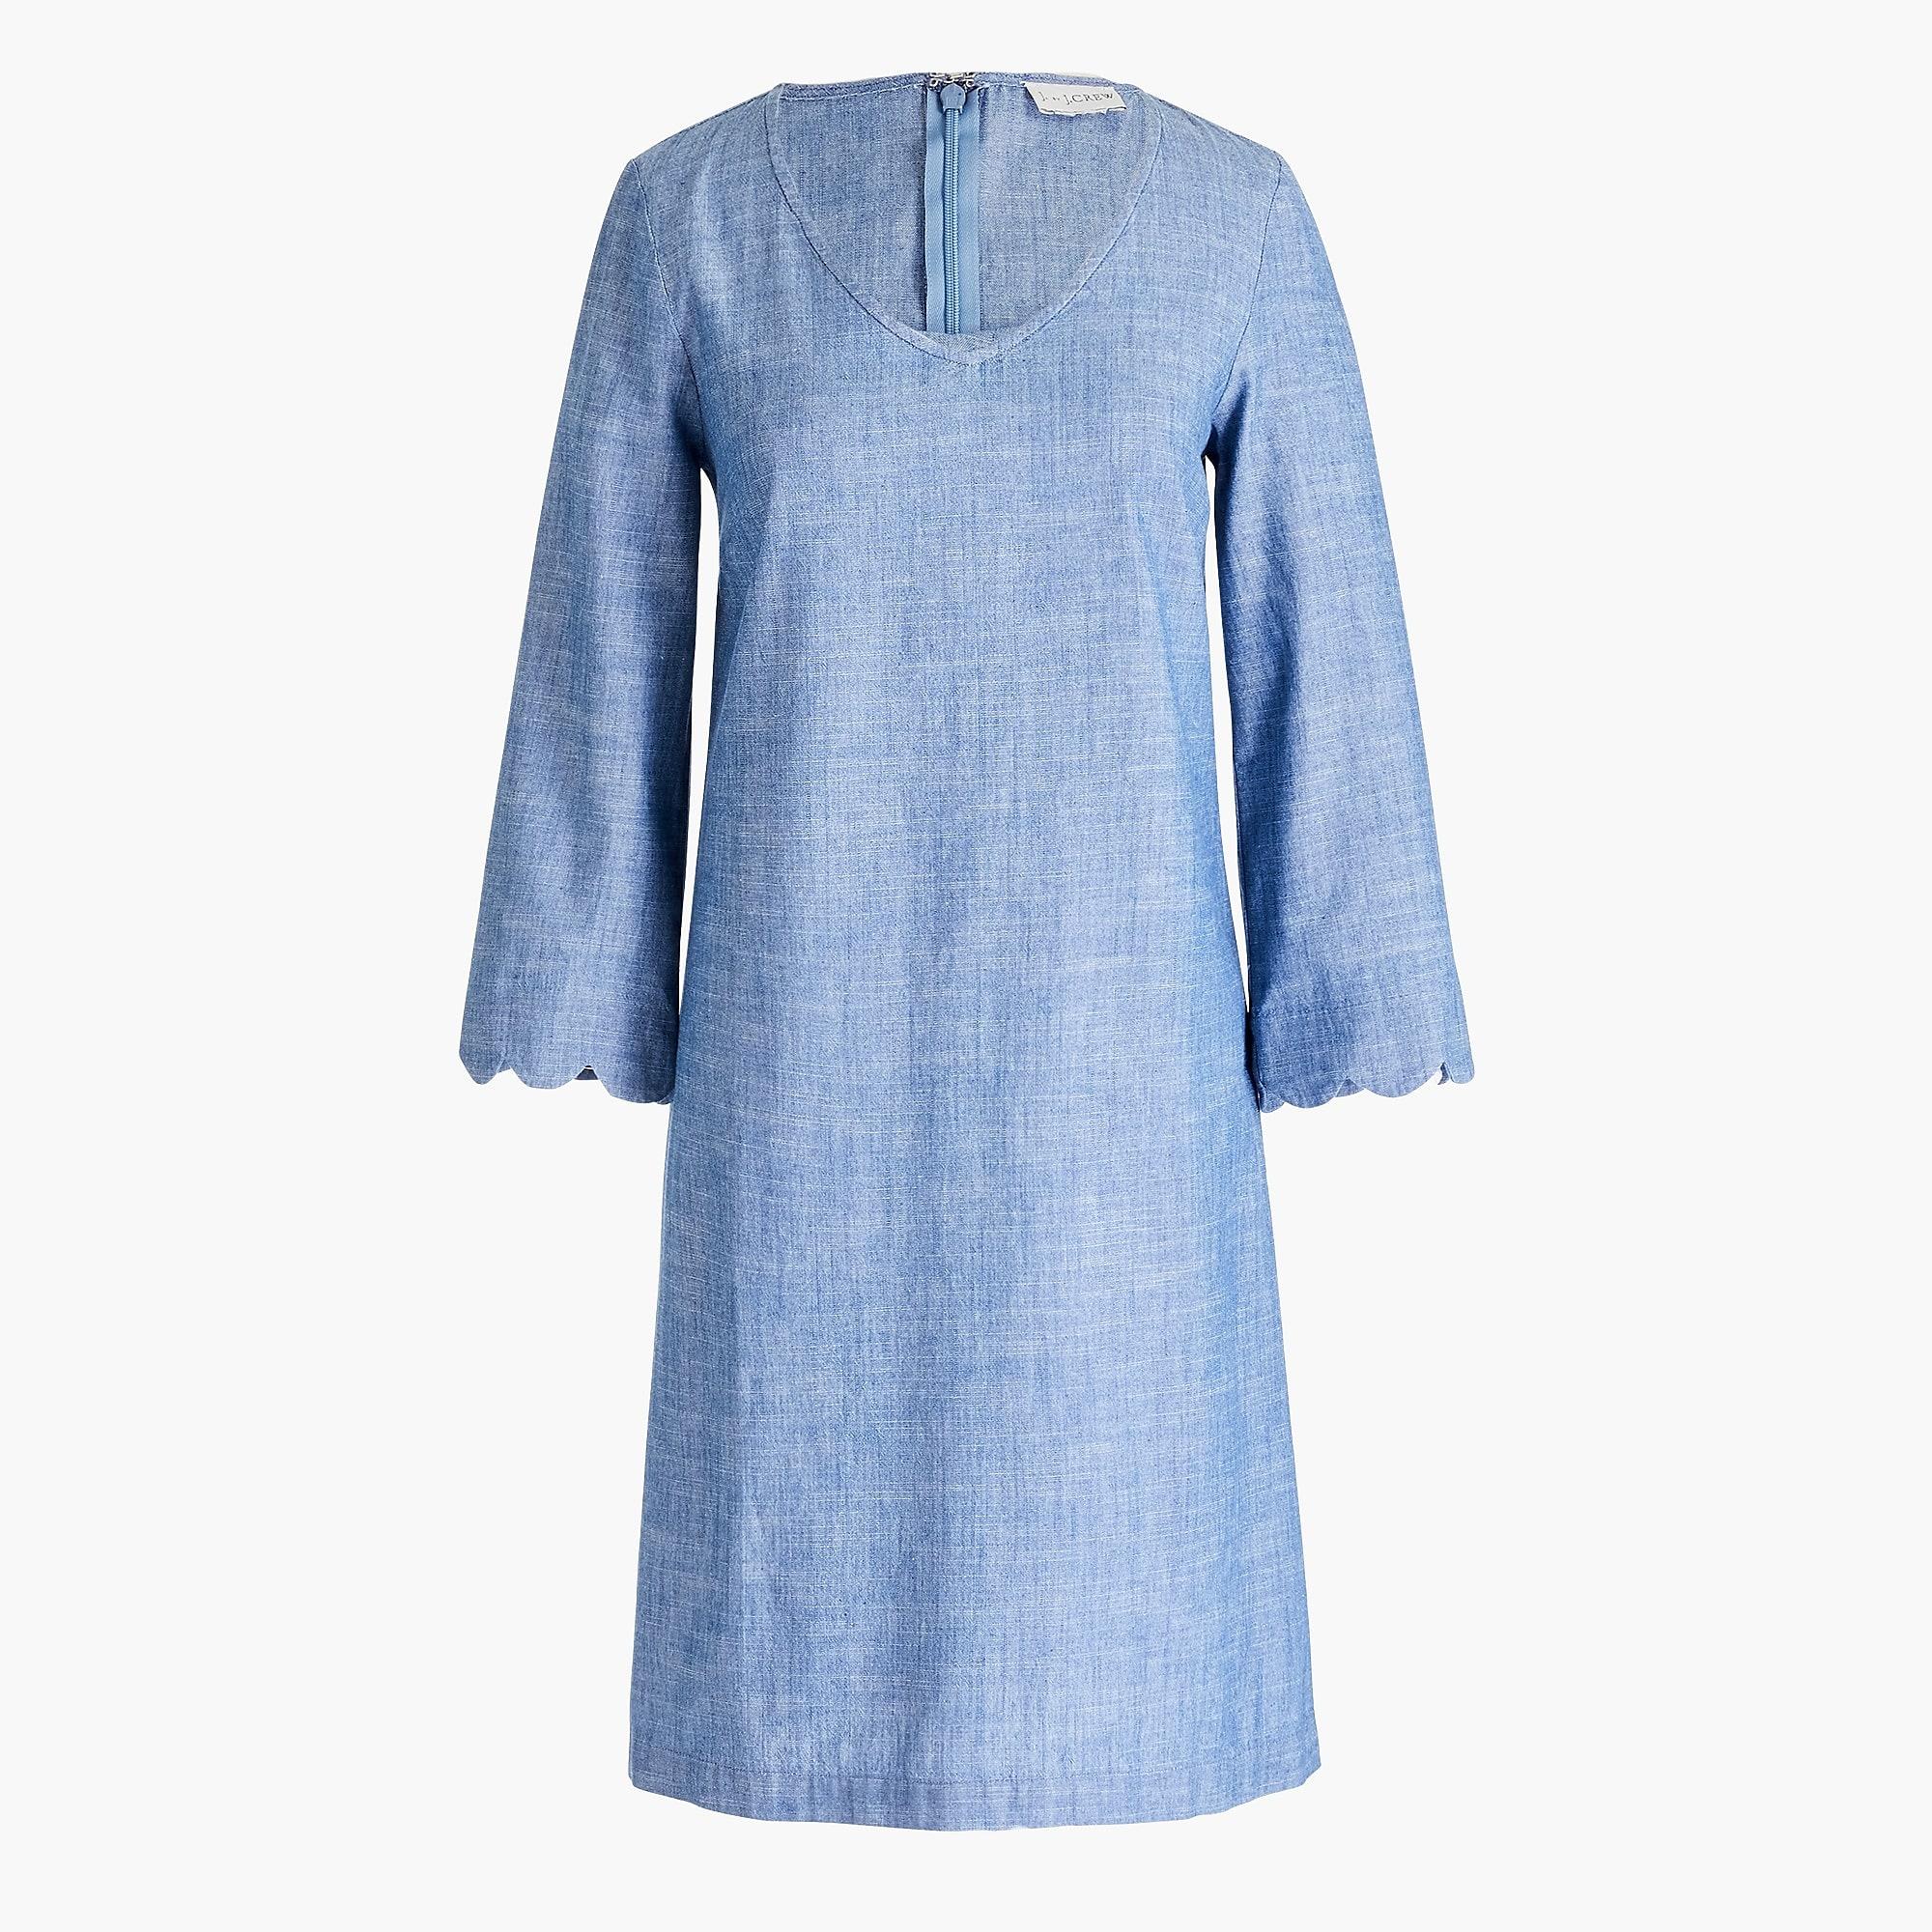 J.Crew Cotton Chambray Dress With Scalloped Sleeve in Blue - Lyst